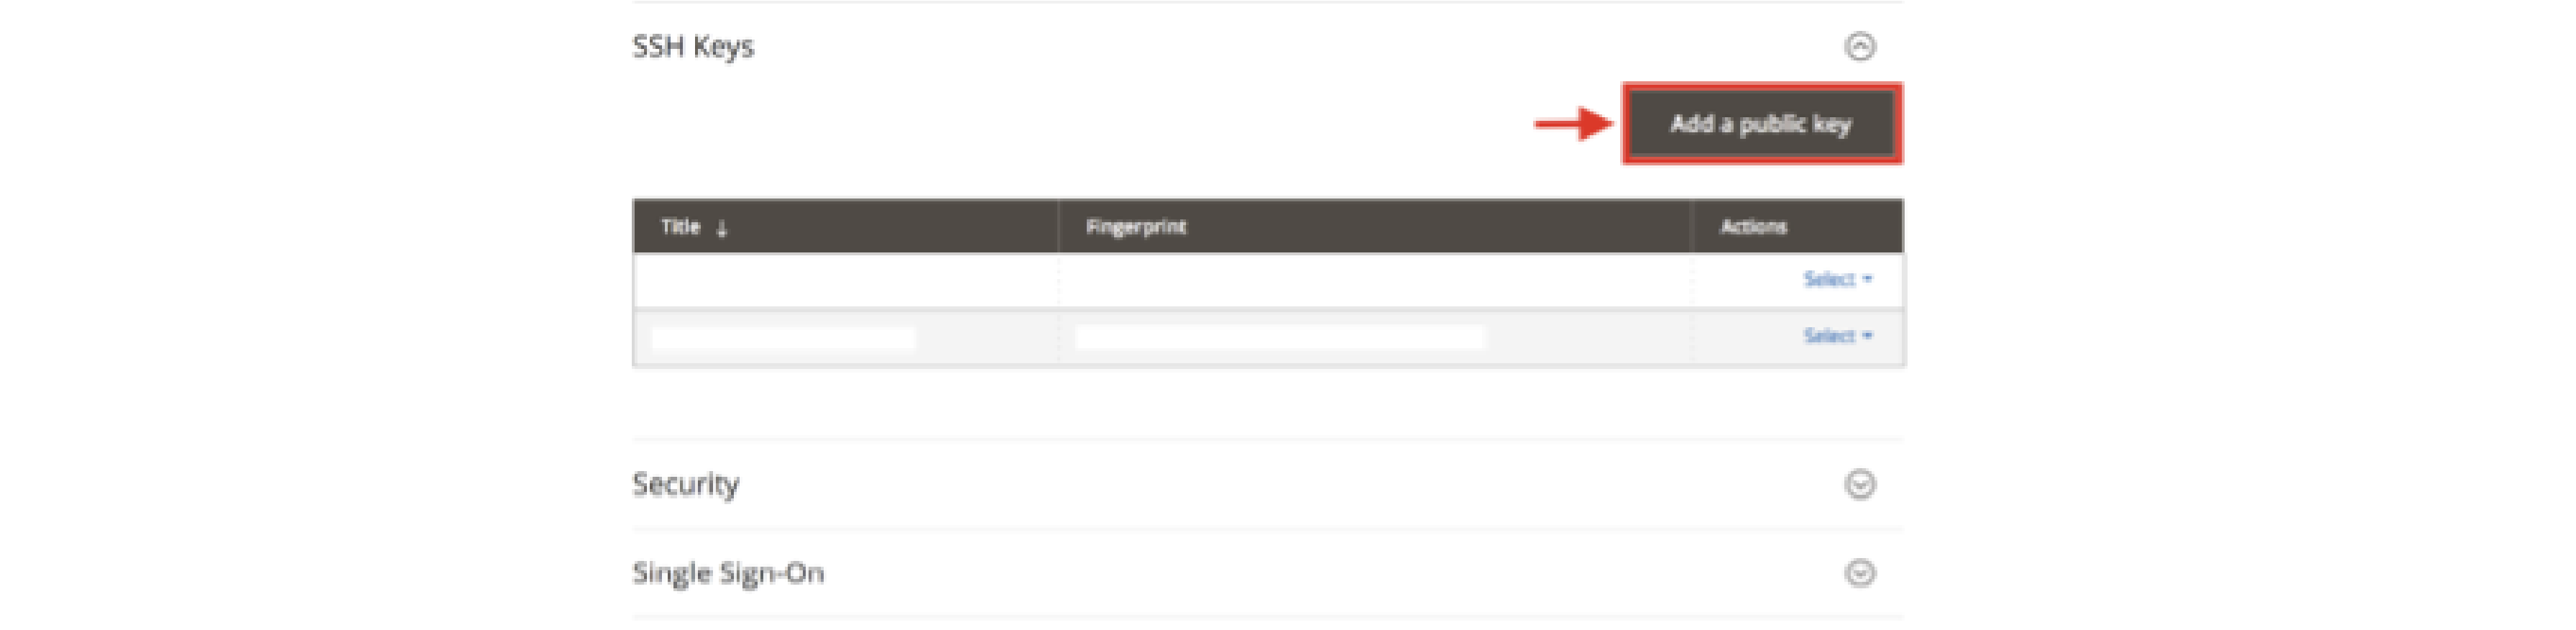 Guide to Adding Public Key to Magento Business Intelligence